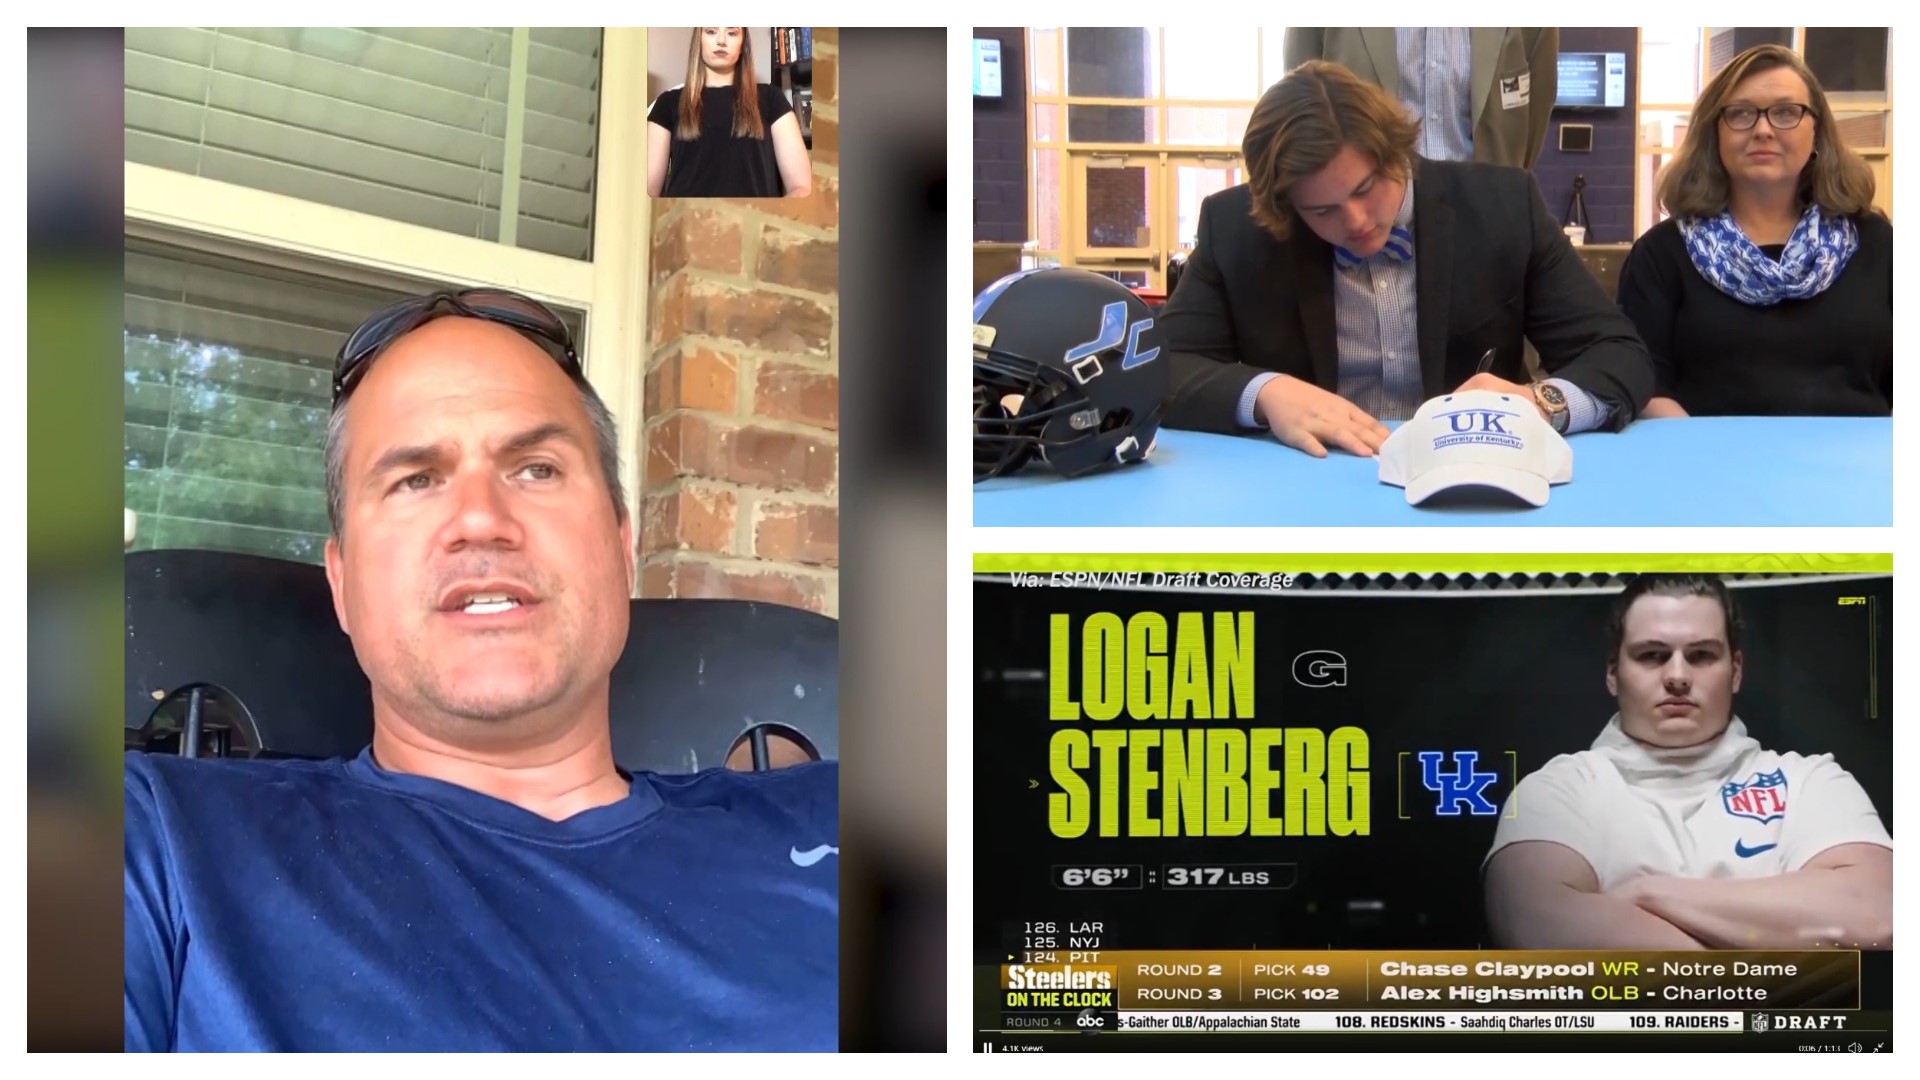 Last weekend, Madison native Logan Stenberg achieved his childhood dream of being selected in the NFL draft. We spoke with his high school coach about the journey.